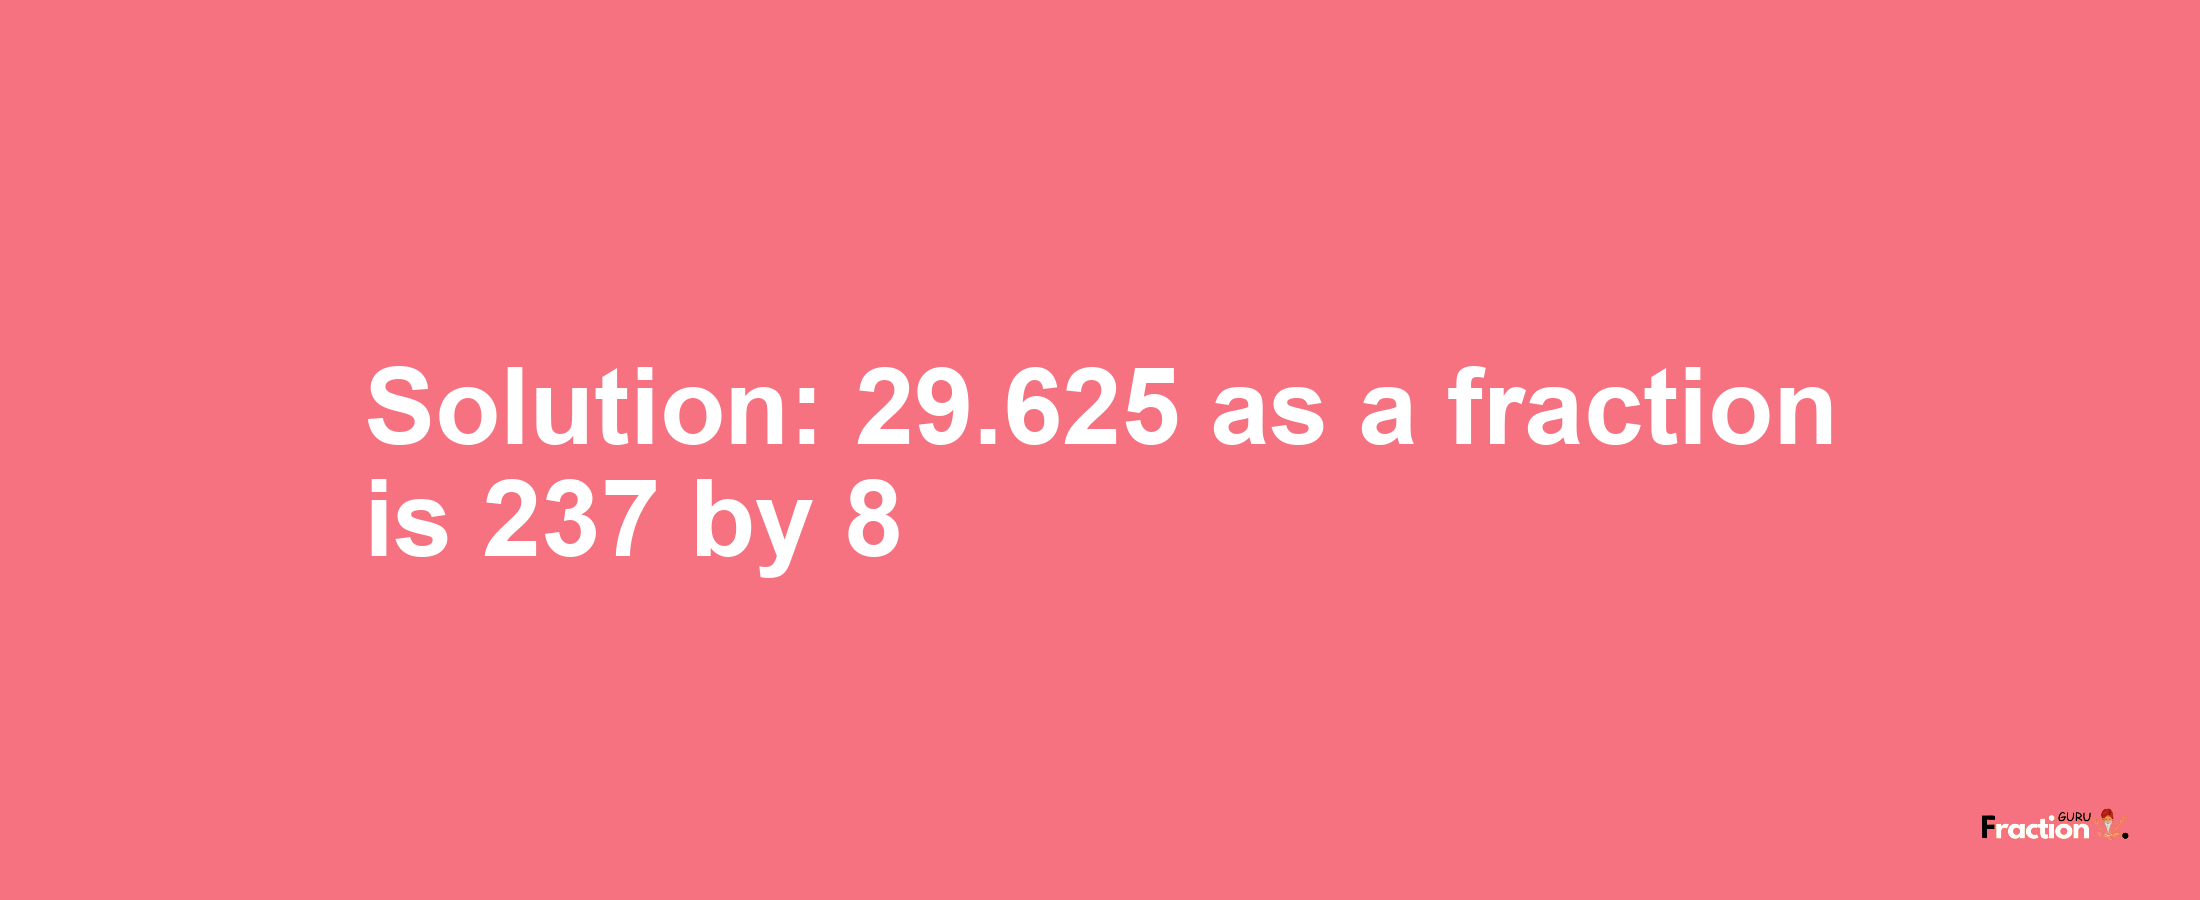 Solution:29.625 as a fraction is 237/8